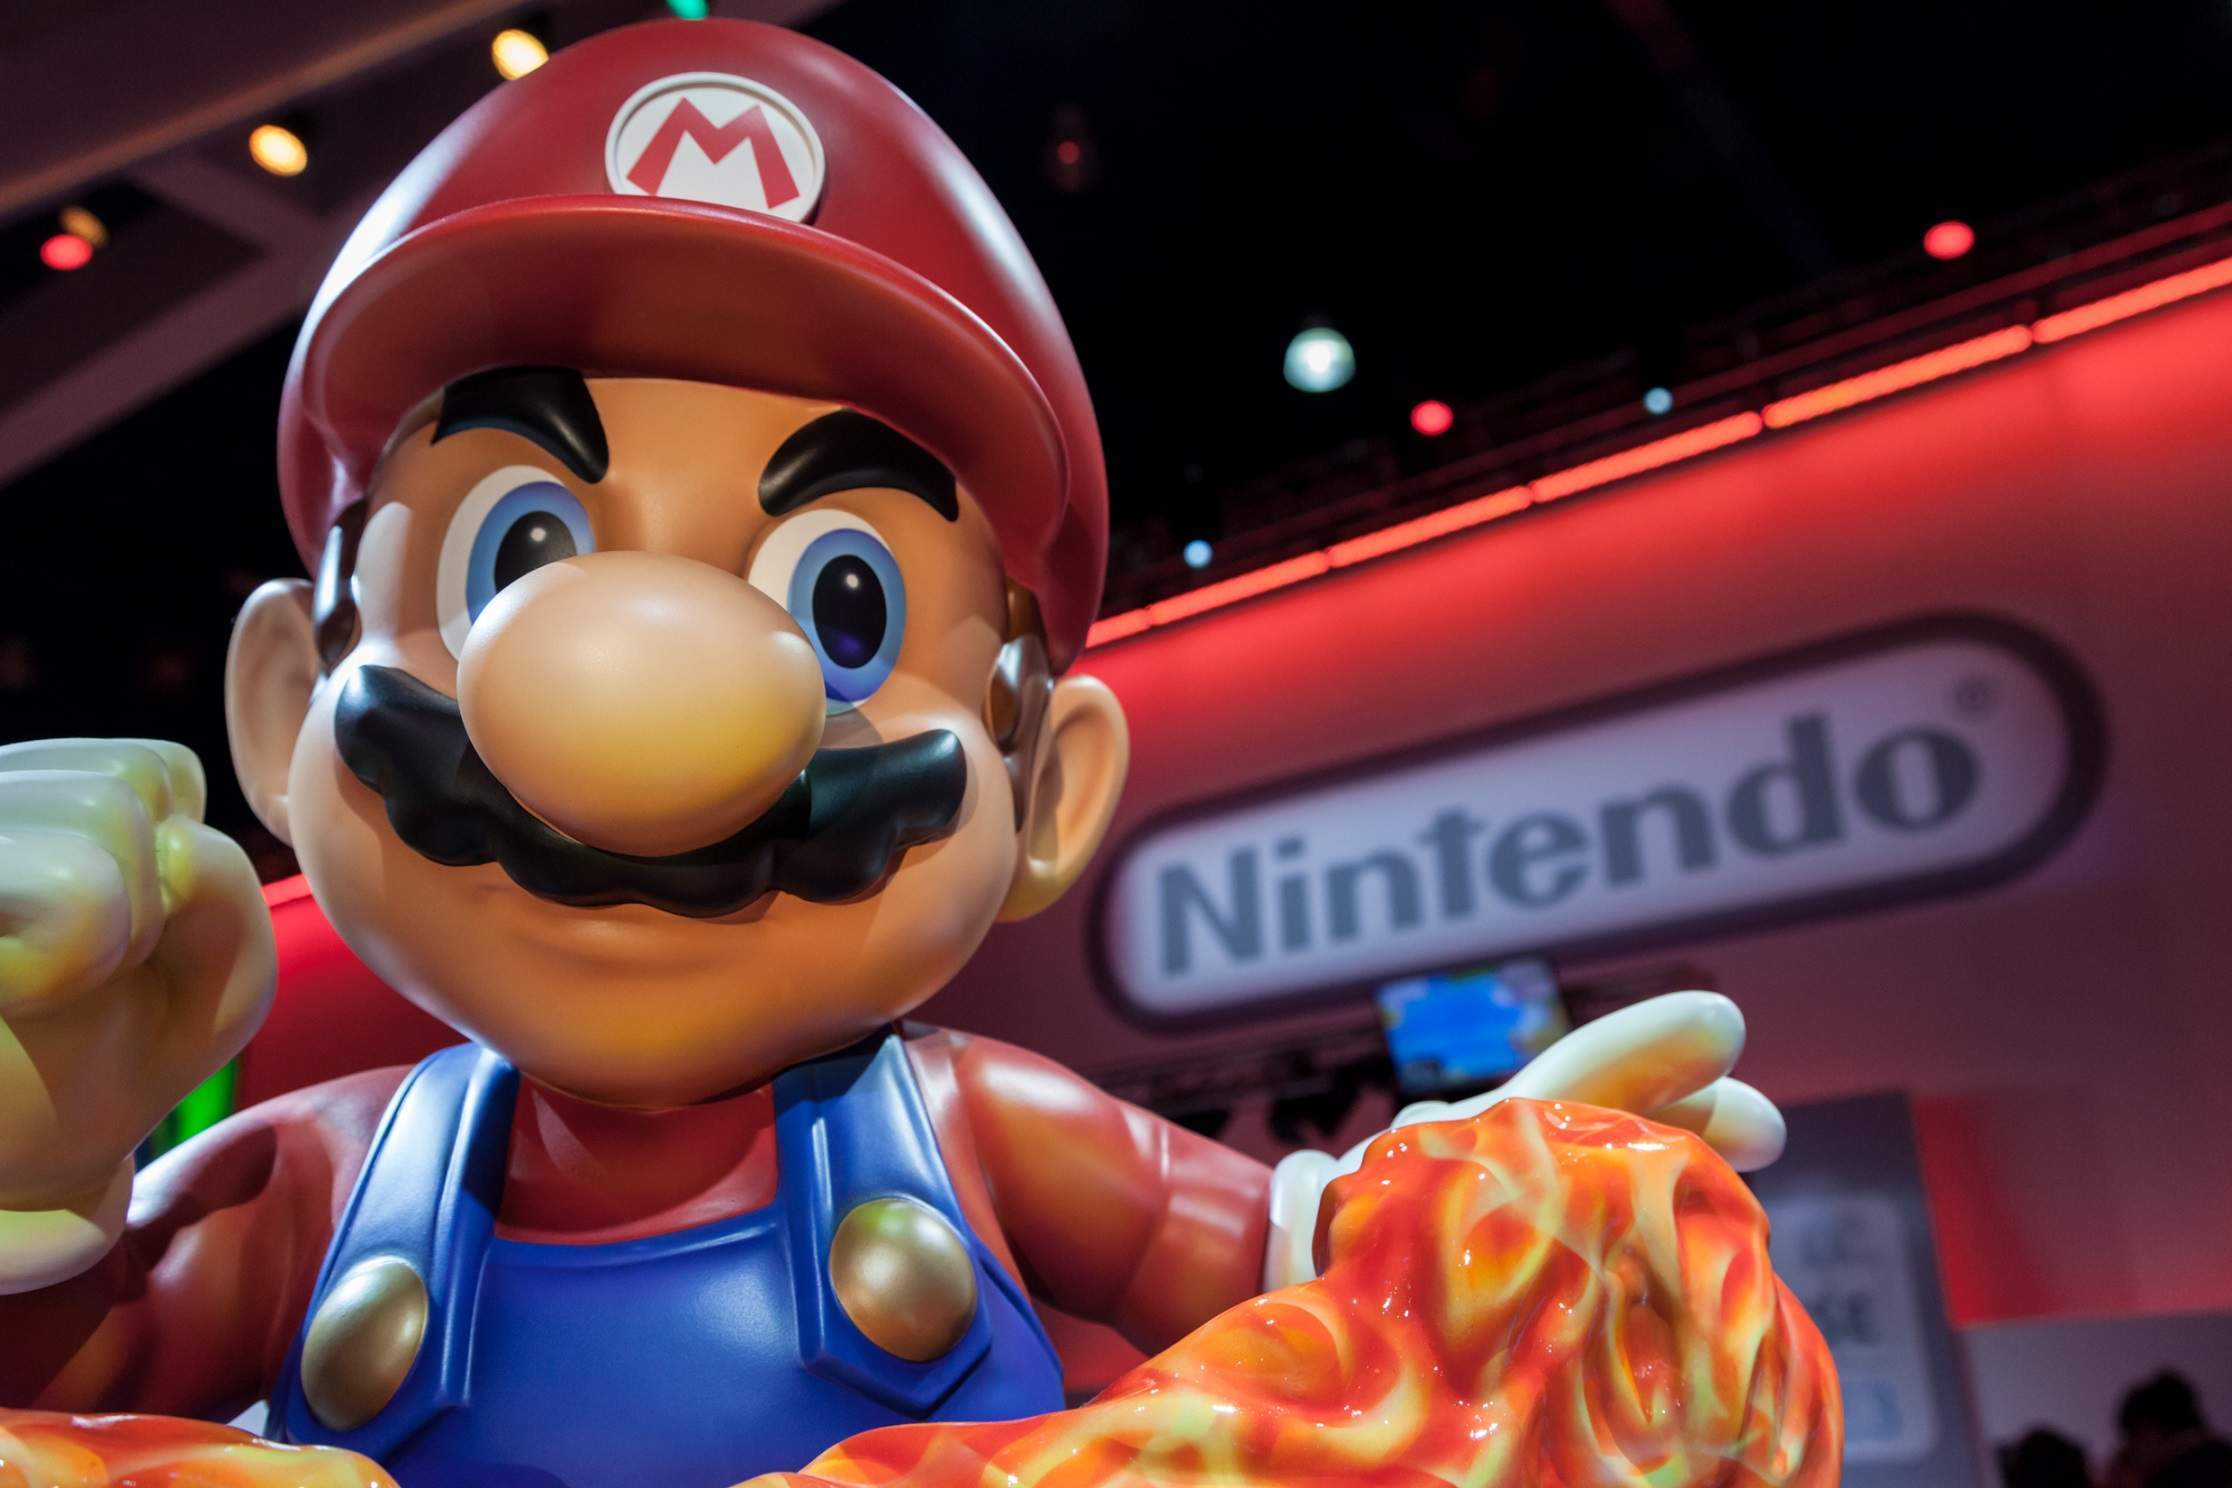 Nintendo profits speed ahead as the Switch pays off